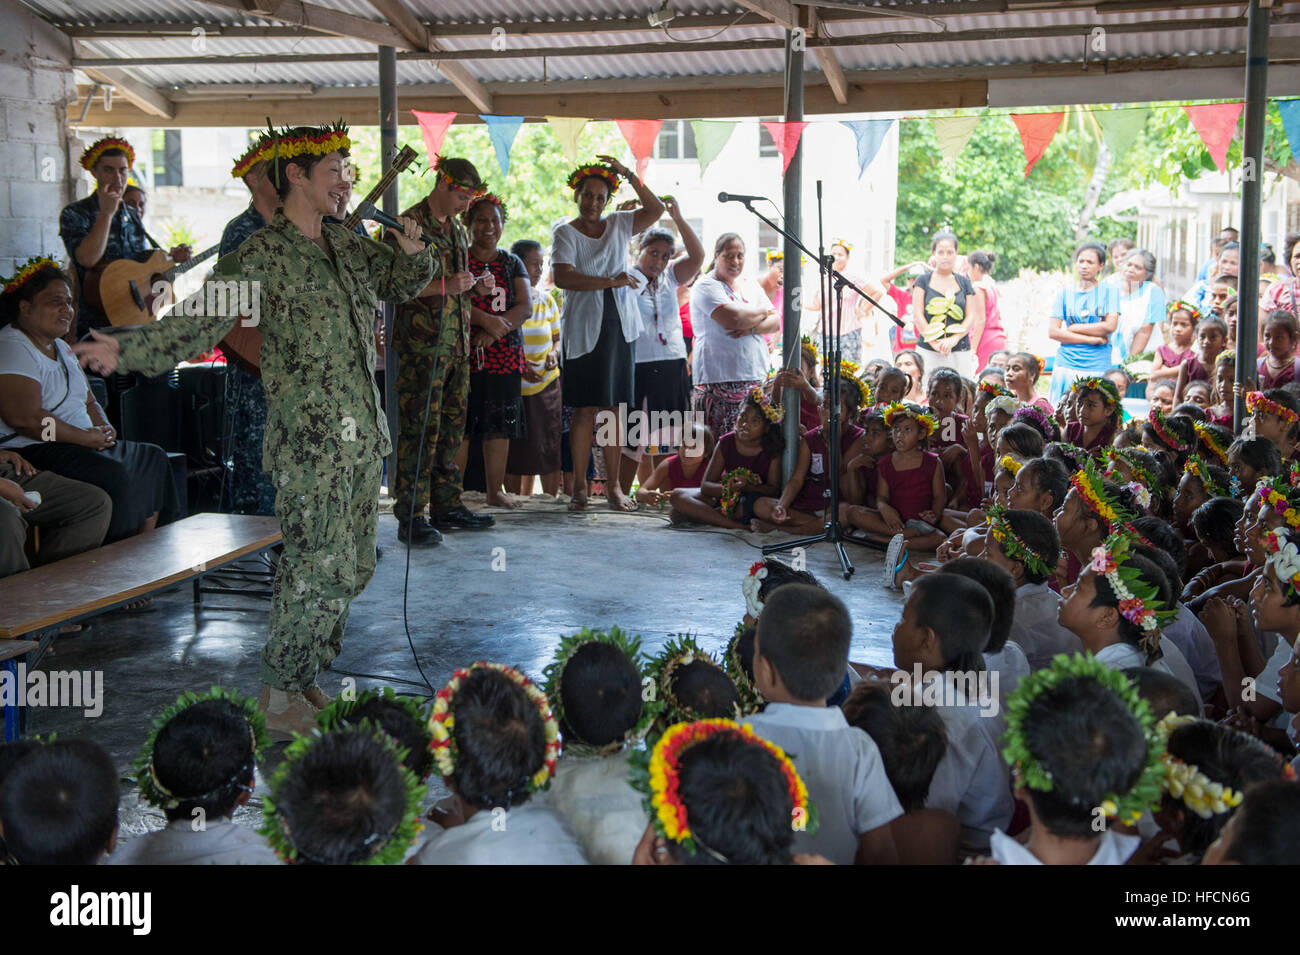 130724-N-SP369-198 TARAWA, Kiribati (July 24, 2013) Cmdr. Joyce Blanchard speaks to a group of children at a local primary school during a Pacific Partnership 2013 community service event. Working at the invitation of each host nation, U.S. Navy forces are joined by non-governmental organizations (NGOs) and regional partners that include Australia, Canada, Colombia, France, Japan, Malaysia, Singapore, South Korea and New Zealand to improve maritime security, conduct humanitarian assistance and strengthen disaster-response preparedness. (U.S. Navy photo by Mass Communication Specialist 3rd Clas Stock Photo